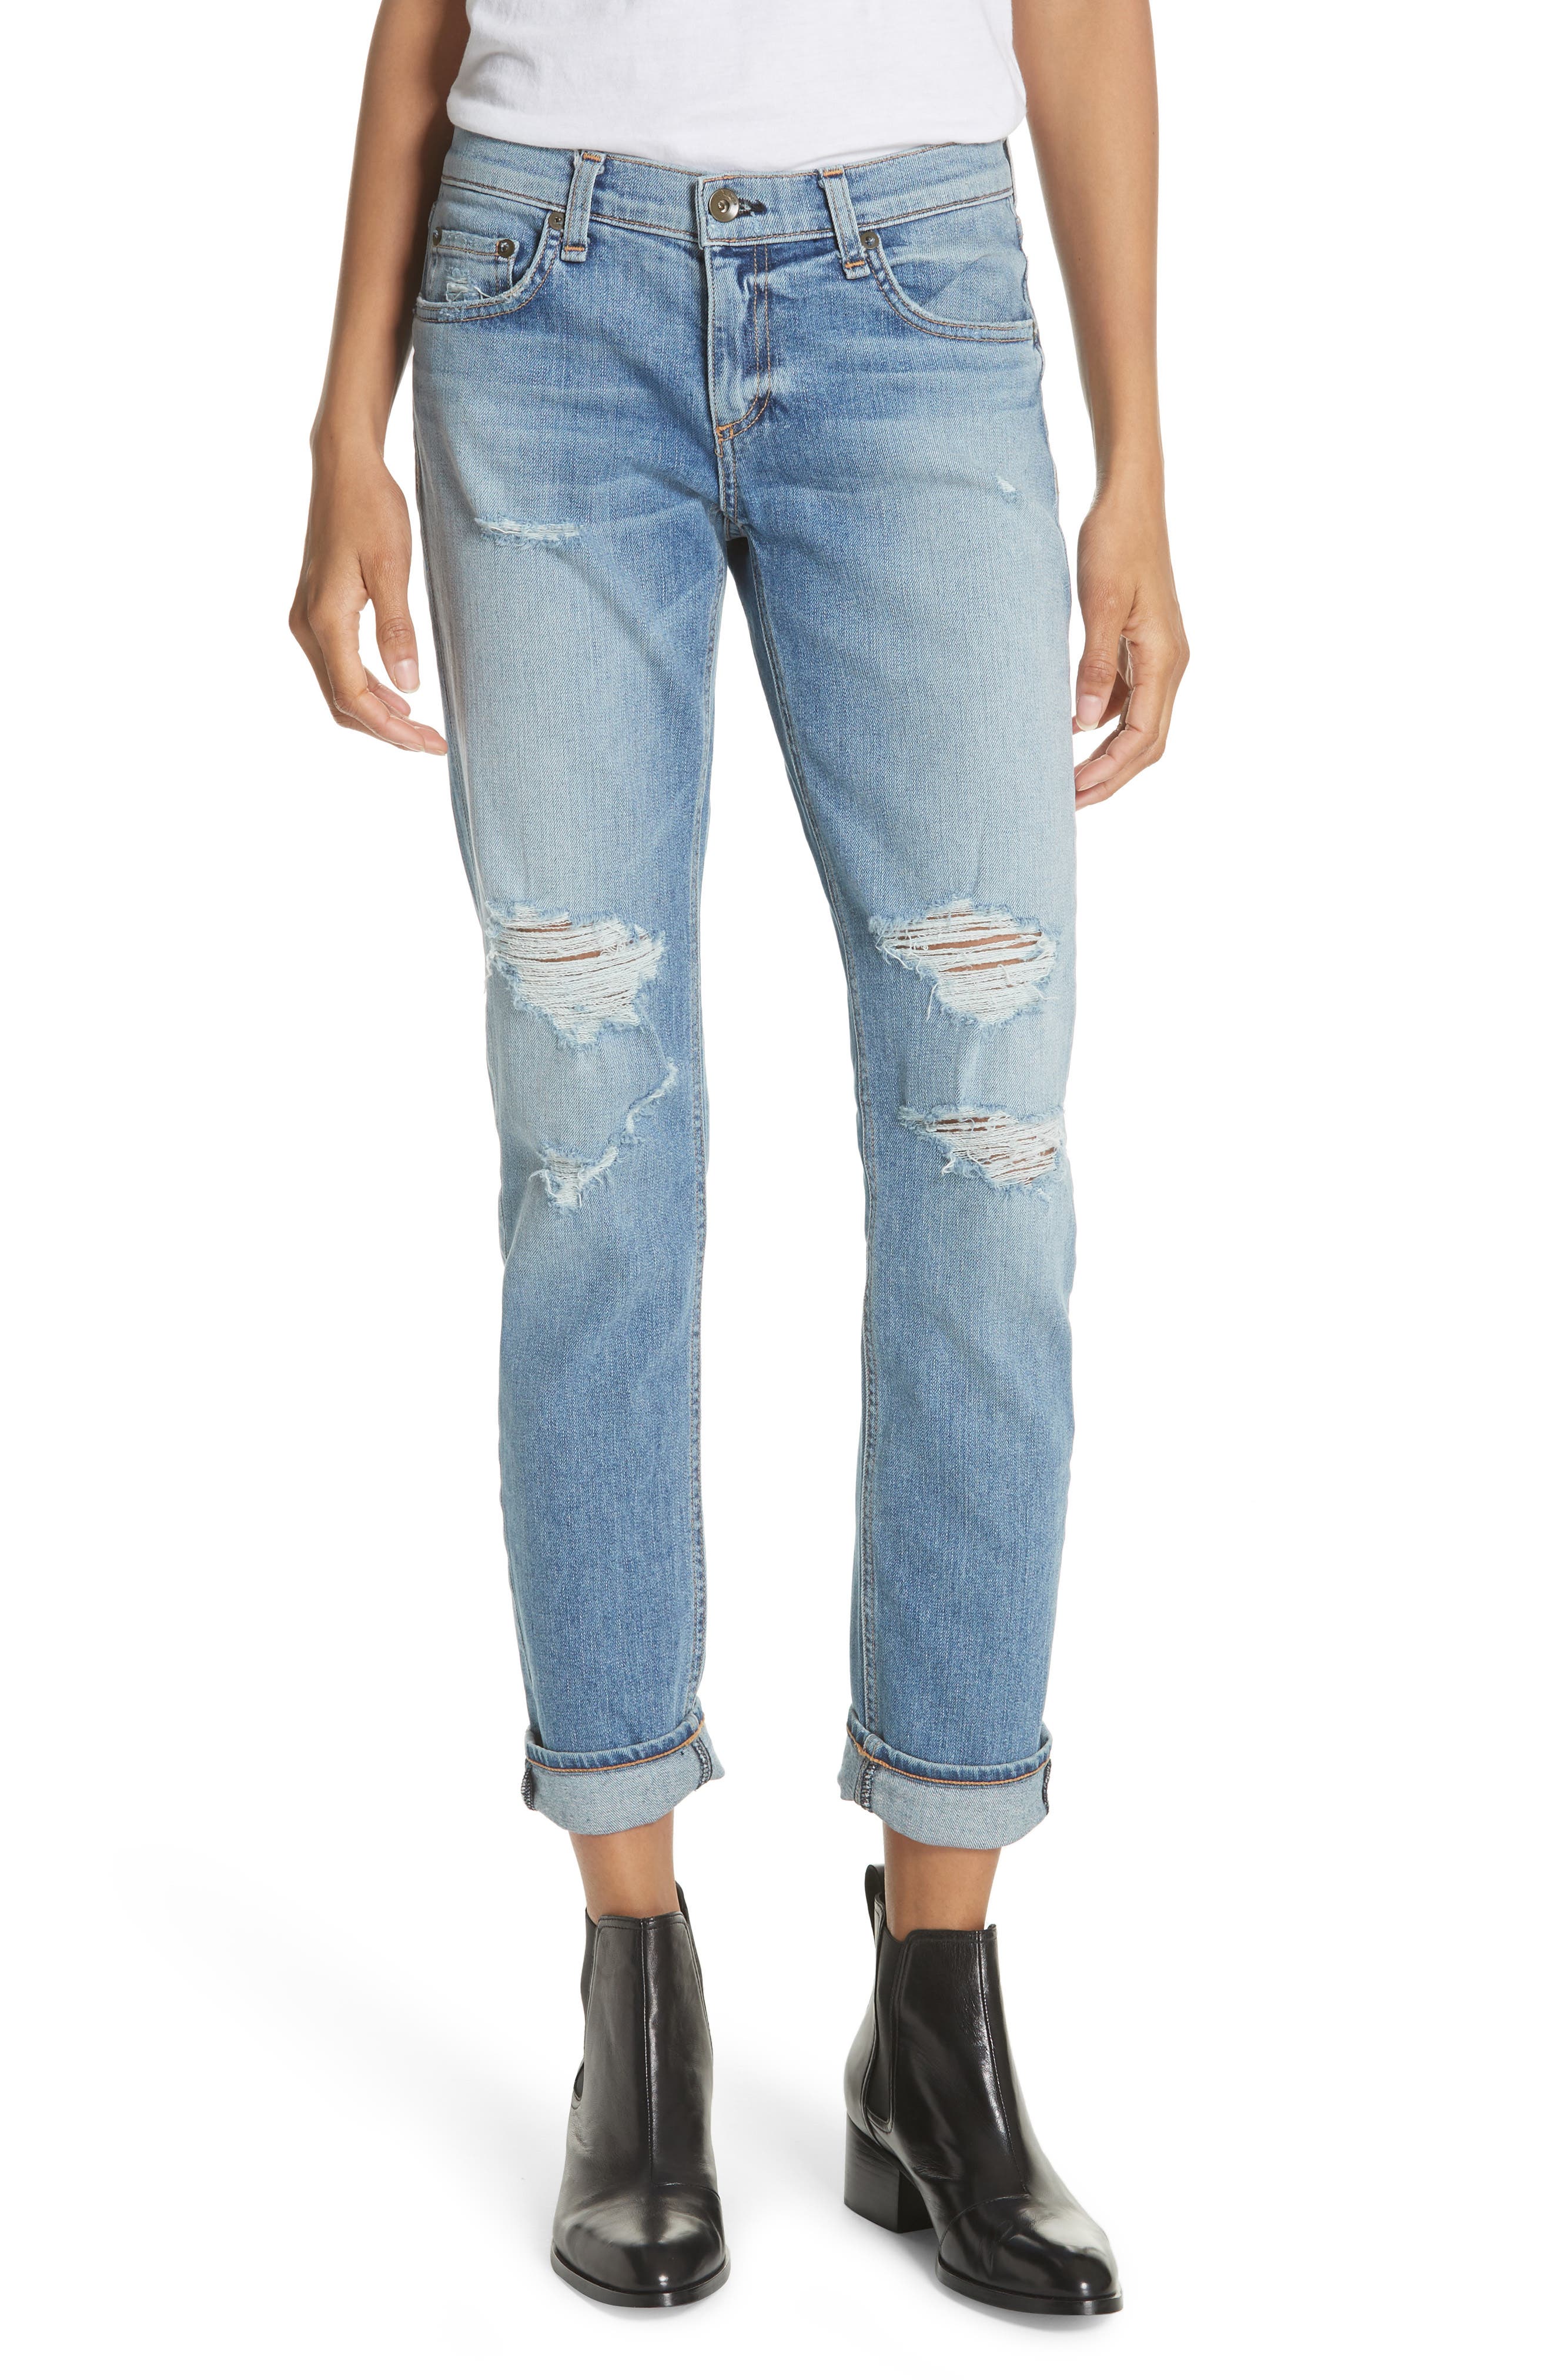 rag and bone destroyed jeans